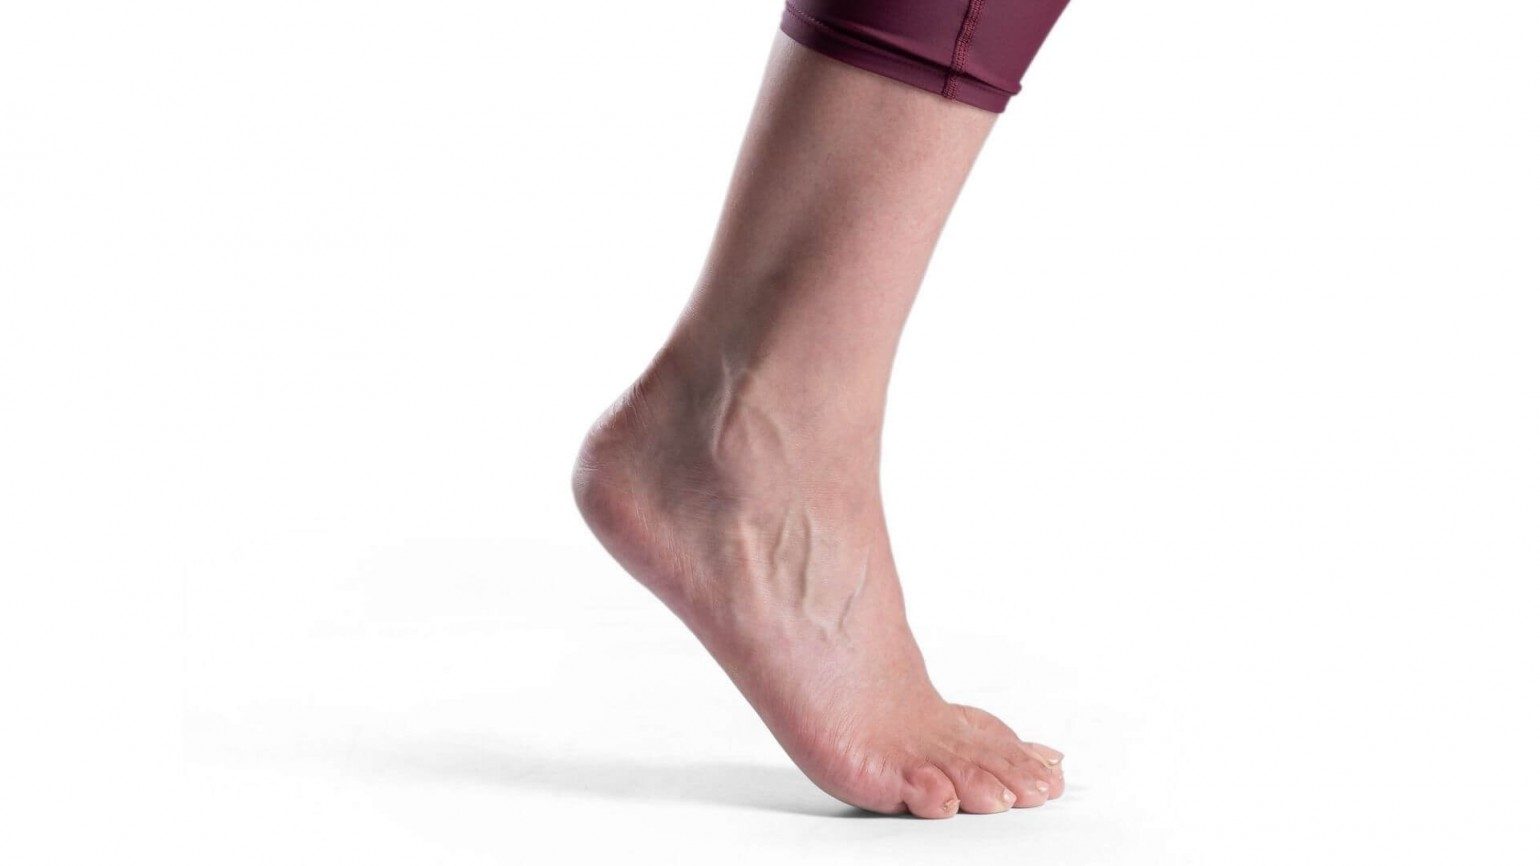 The Consequences of Leaving Plantar Fasciitis Untreated | Heel That Pain